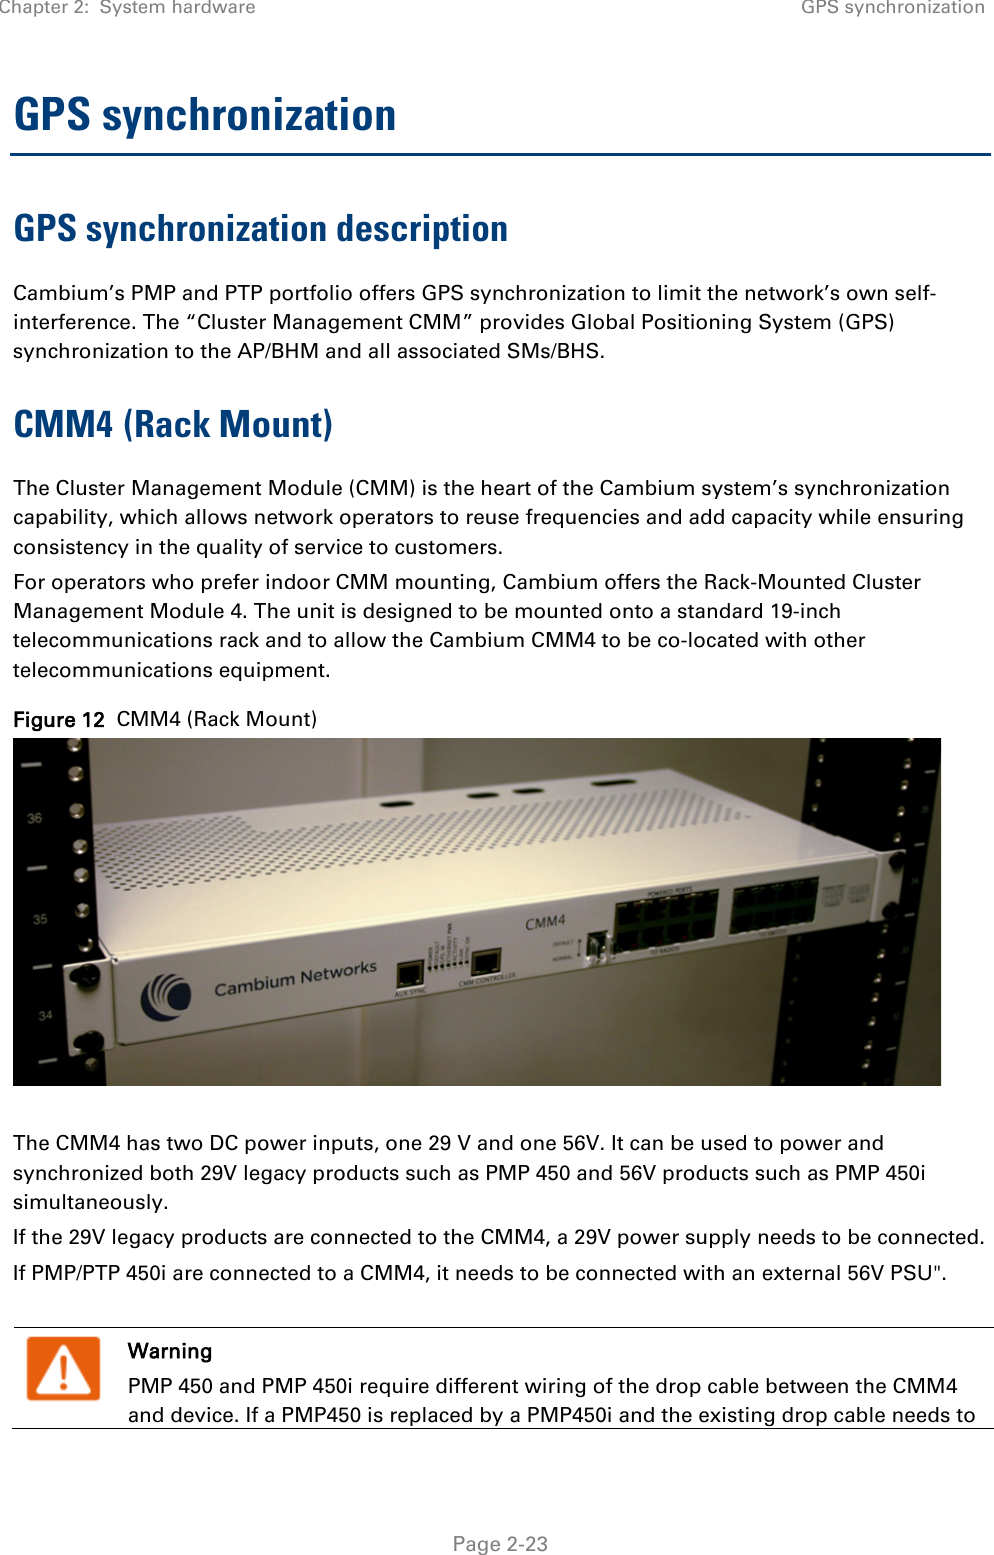 Chapter 2:  System hardware GPS synchronization   Page 2-23 GPS synchronization GPS synchronization description Cambium’s PMP and PTP portfolio offers GPS synchronization to limit the network’s own self-interference. The “Cluster Management CMM” provides Global Positioning System (GPS) synchronization to the AP/BHM and all associated SMs/BHS.  CMM4 (Rack Mount) The Cluster Management Module (CMM) is the heart of the Cambium system’s synchronization capability, which allows network operators to reuse frequencies and add capacity while ensuring consistency in the quality of service to customers.  For operators who prefer indoor CMM mounting, Cambium offers the Rack-Mounted Cluster Management Module 4. The unit is designed to be mounted onto a standard 19-inch telecommunications rack and to allow the Cambium CMM4 to be co-located with other telecommunications equipment. Figure 12  CMM4 (Rack Mount)   The CMM4 has two DC power inputs, one 29 V and one 56V. It can be used to power and synchronized both 29V legacy products such as PMP 450 and 56V products such as PMP 450i simultaneously. If the 29V legacy products are connected to the CMM4, a 29V power supply needs to be connected.  If PMP/PTP 450i are connected to a CMM4, it needs to be connected with an external 56V PSU&quot;.   Warning PMP 450 and PMP 450i require different wiring of the drop cable between the CMM4 and device. If a PMP450 is replaced by a PMP450i and the existing drop cable needs to 